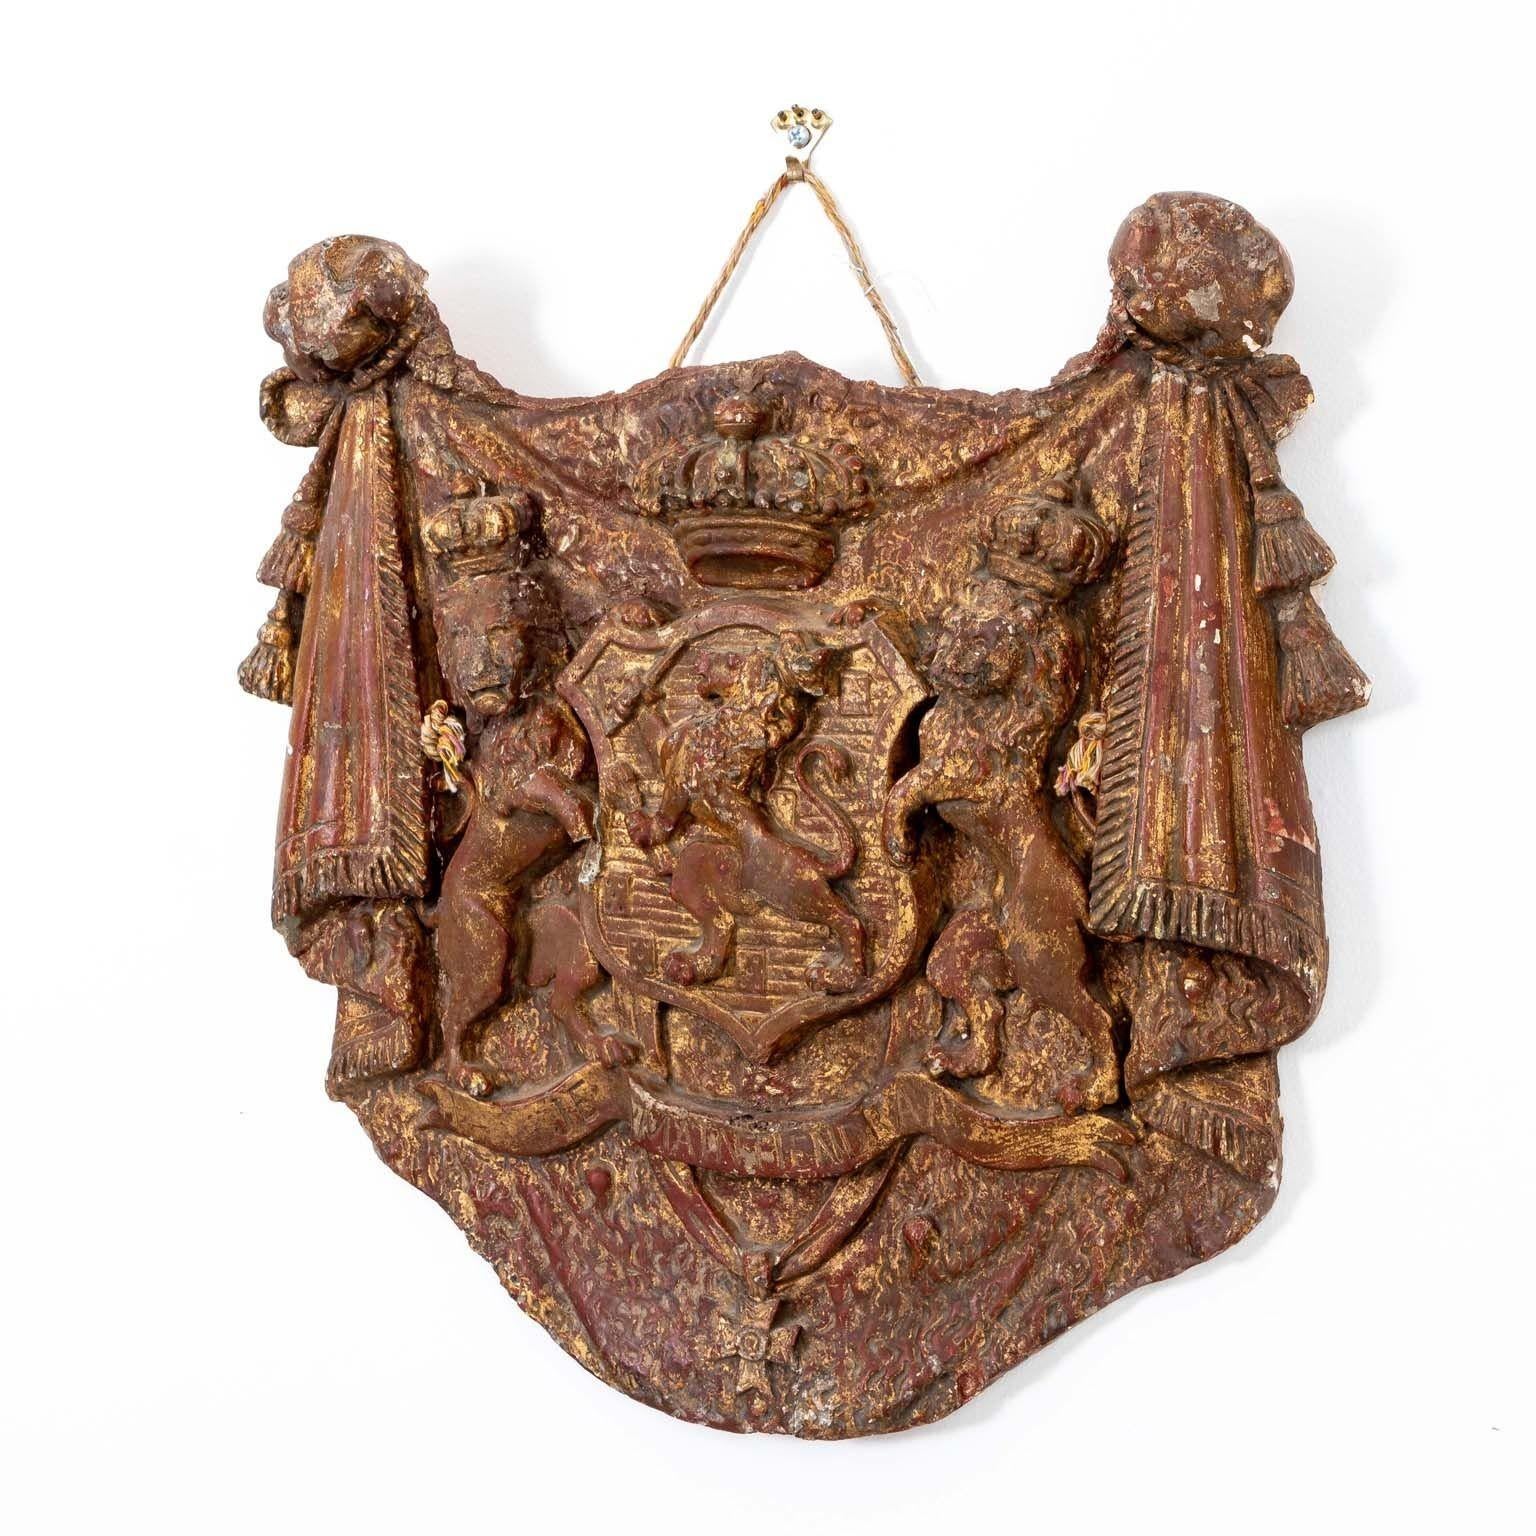 This captivating early 20th Century plaster English heraldic plaque boasts a regal ensemble of crowned lions, a prominent cross, and elegantly draped swags adorned with delicate tassels. Crafted with meticulous detail, it exudes an air of grandeur